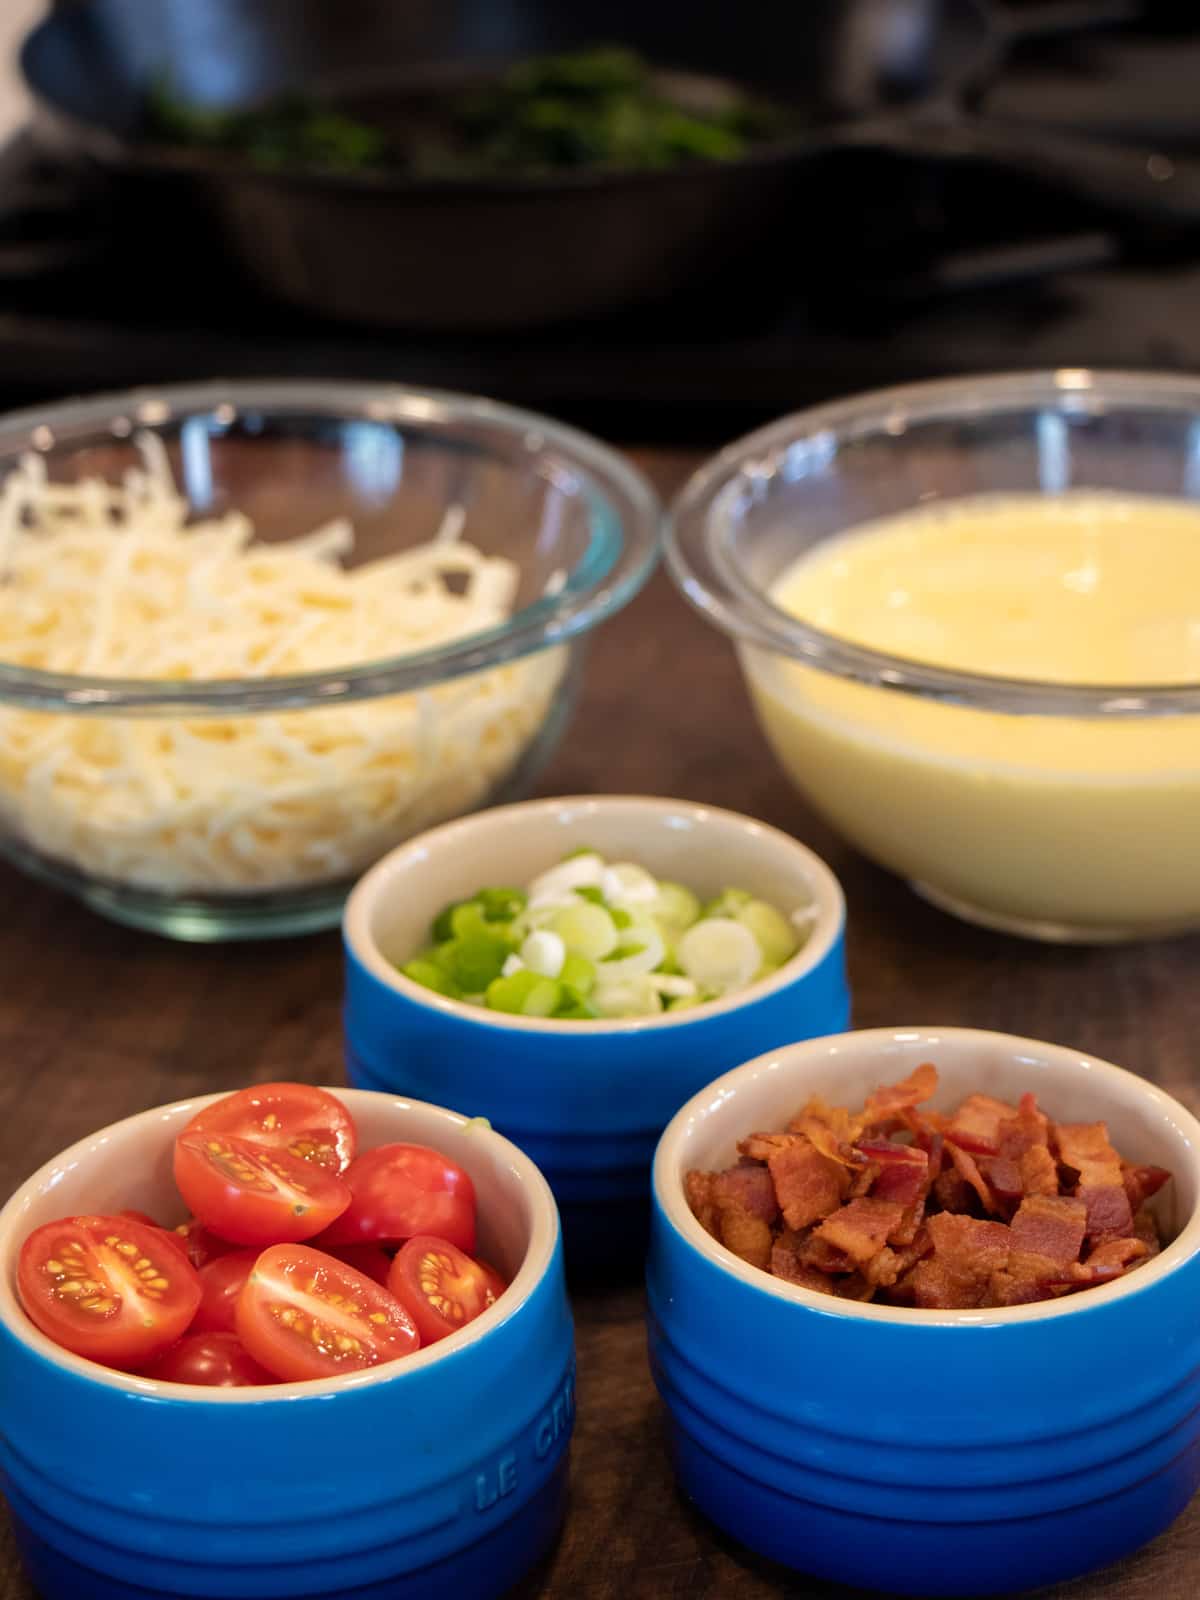 Ingredients arranged together in different sized bowls.